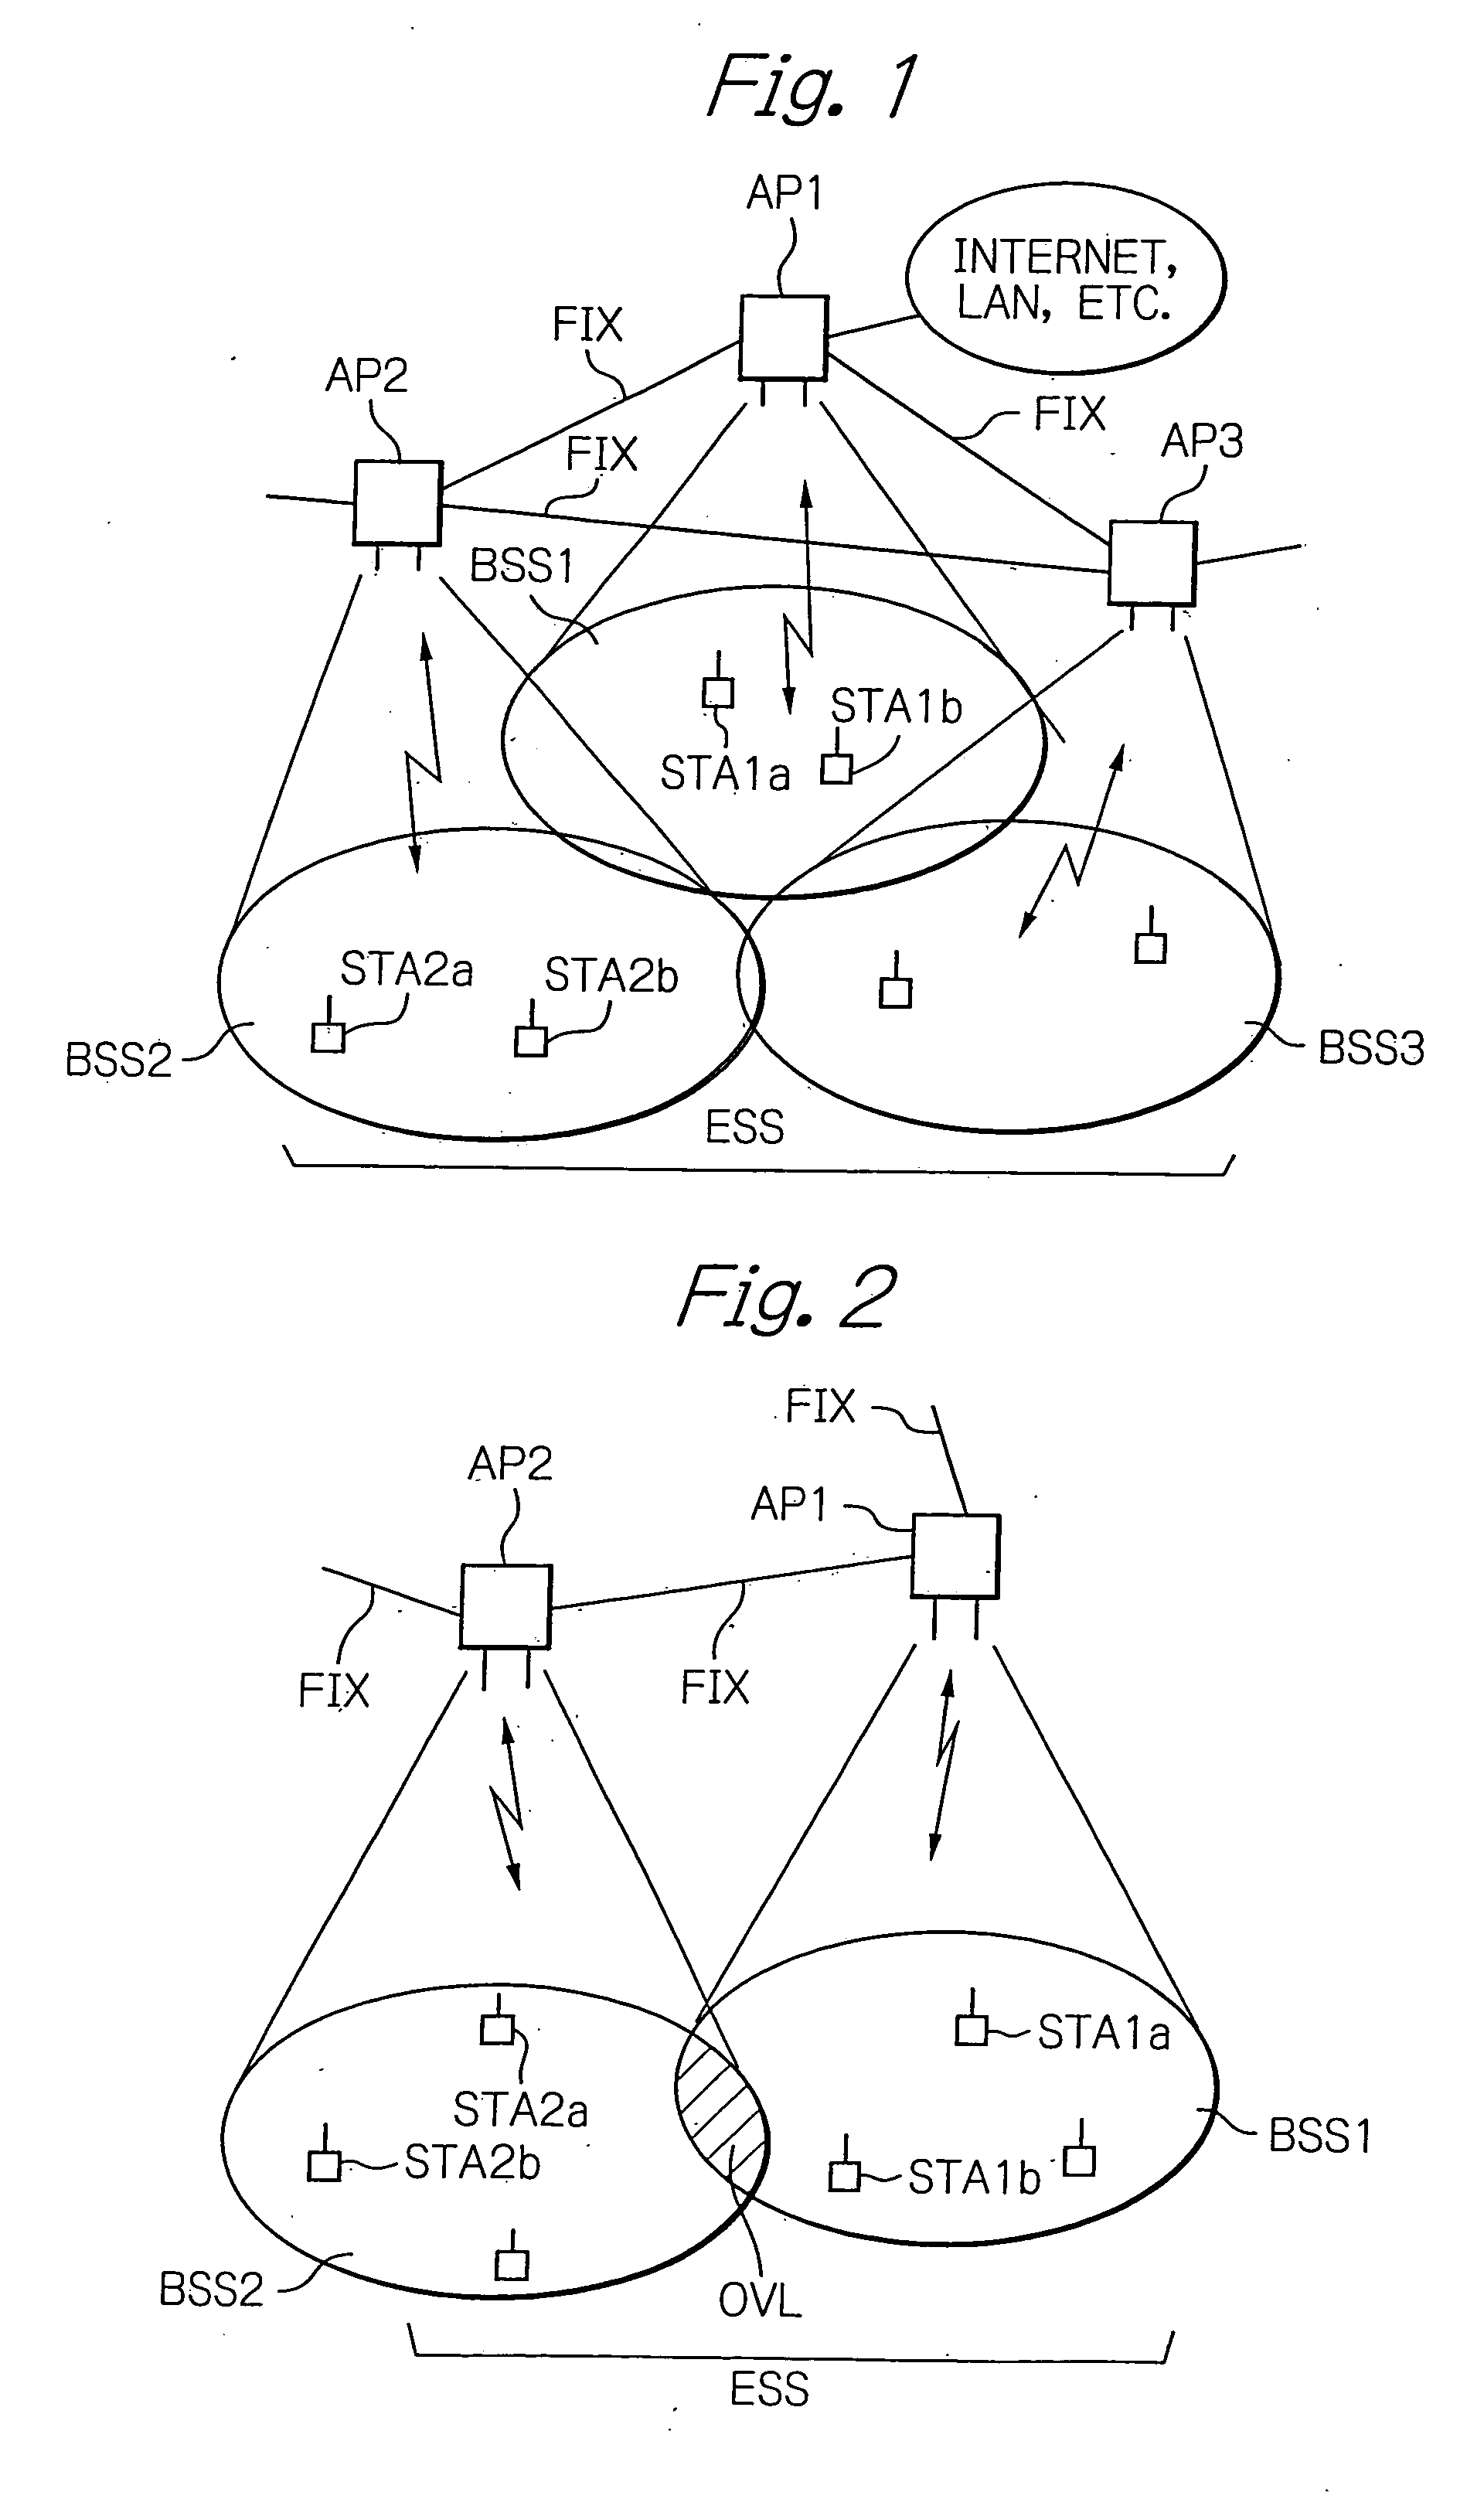 Handover method in wireless LAN by assigning an identification code to a mobile station